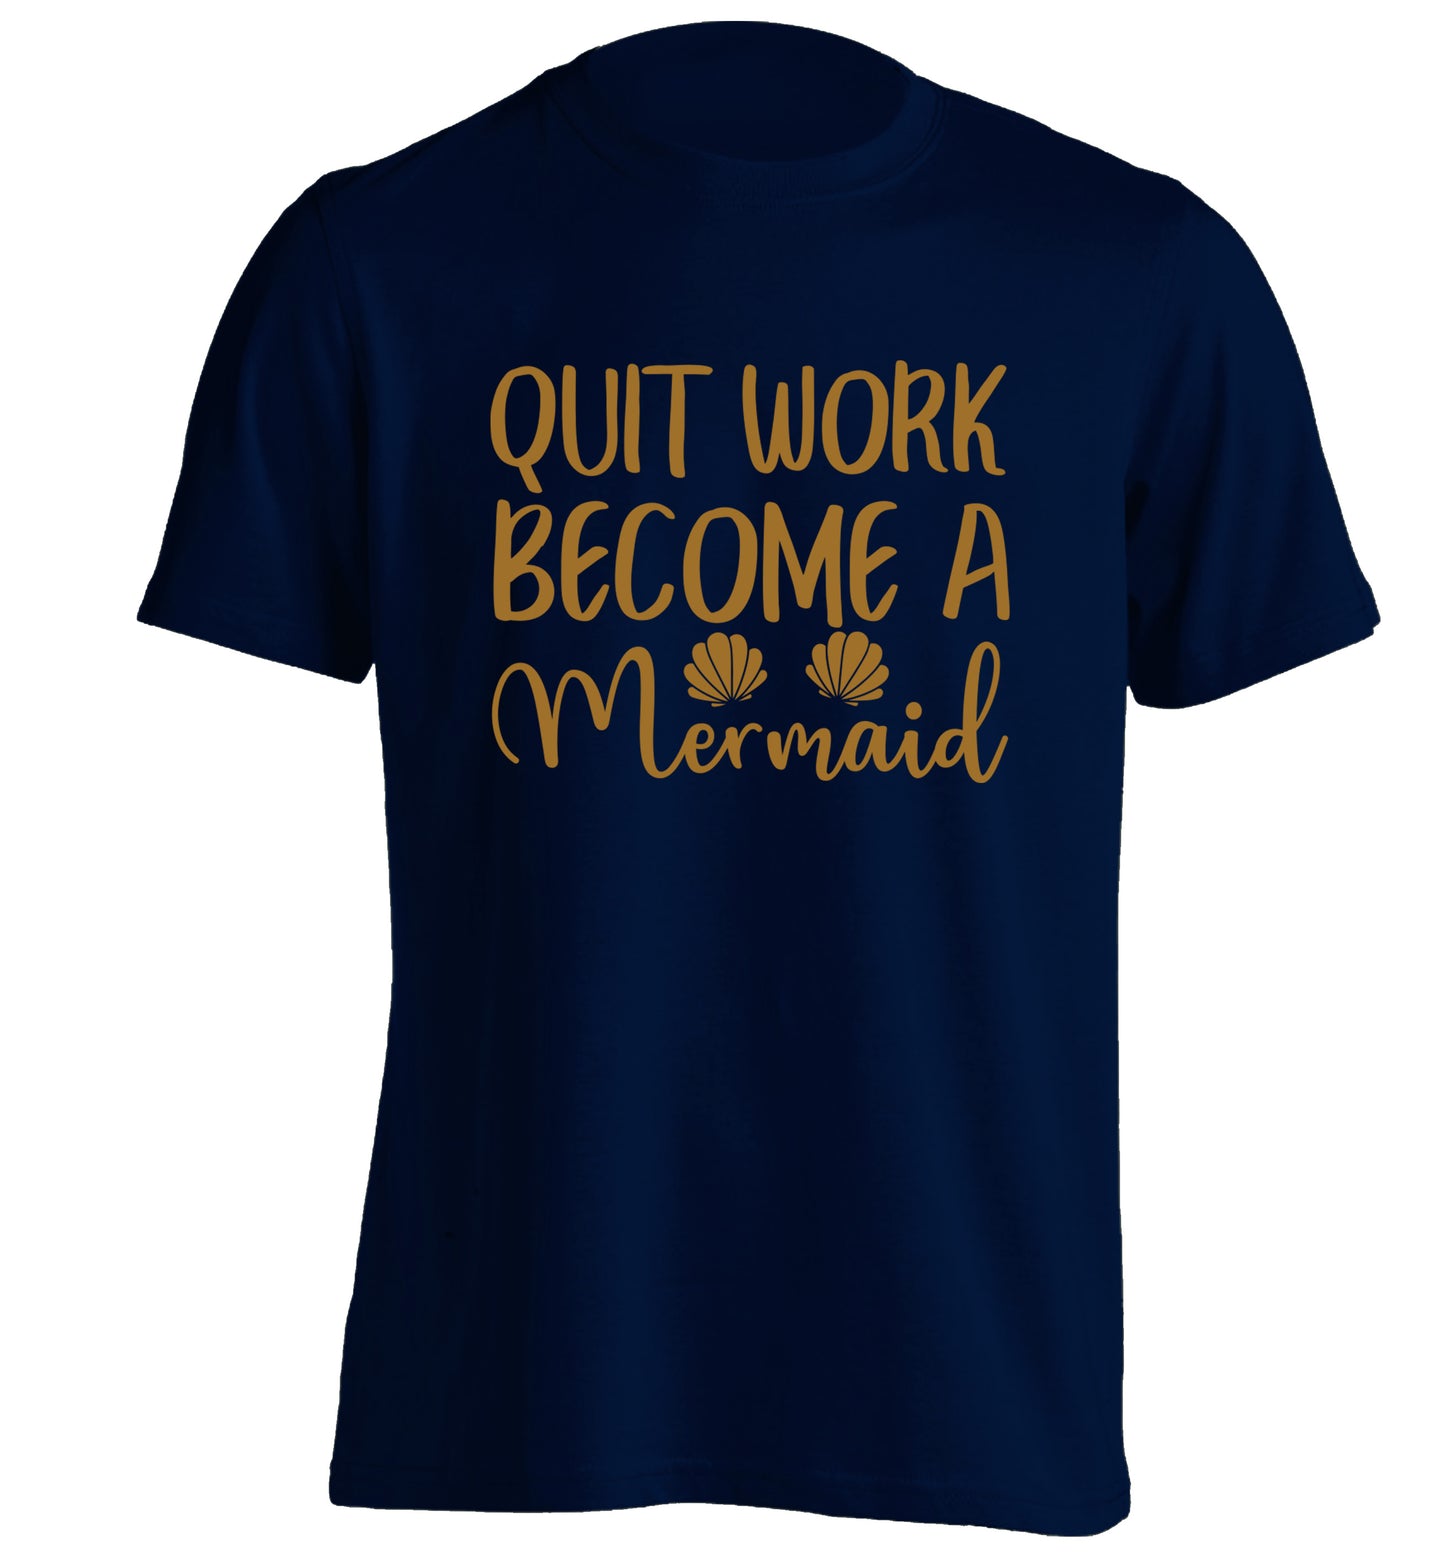 Quit work become a mermaid adults unisex navy Tshirt 2XL